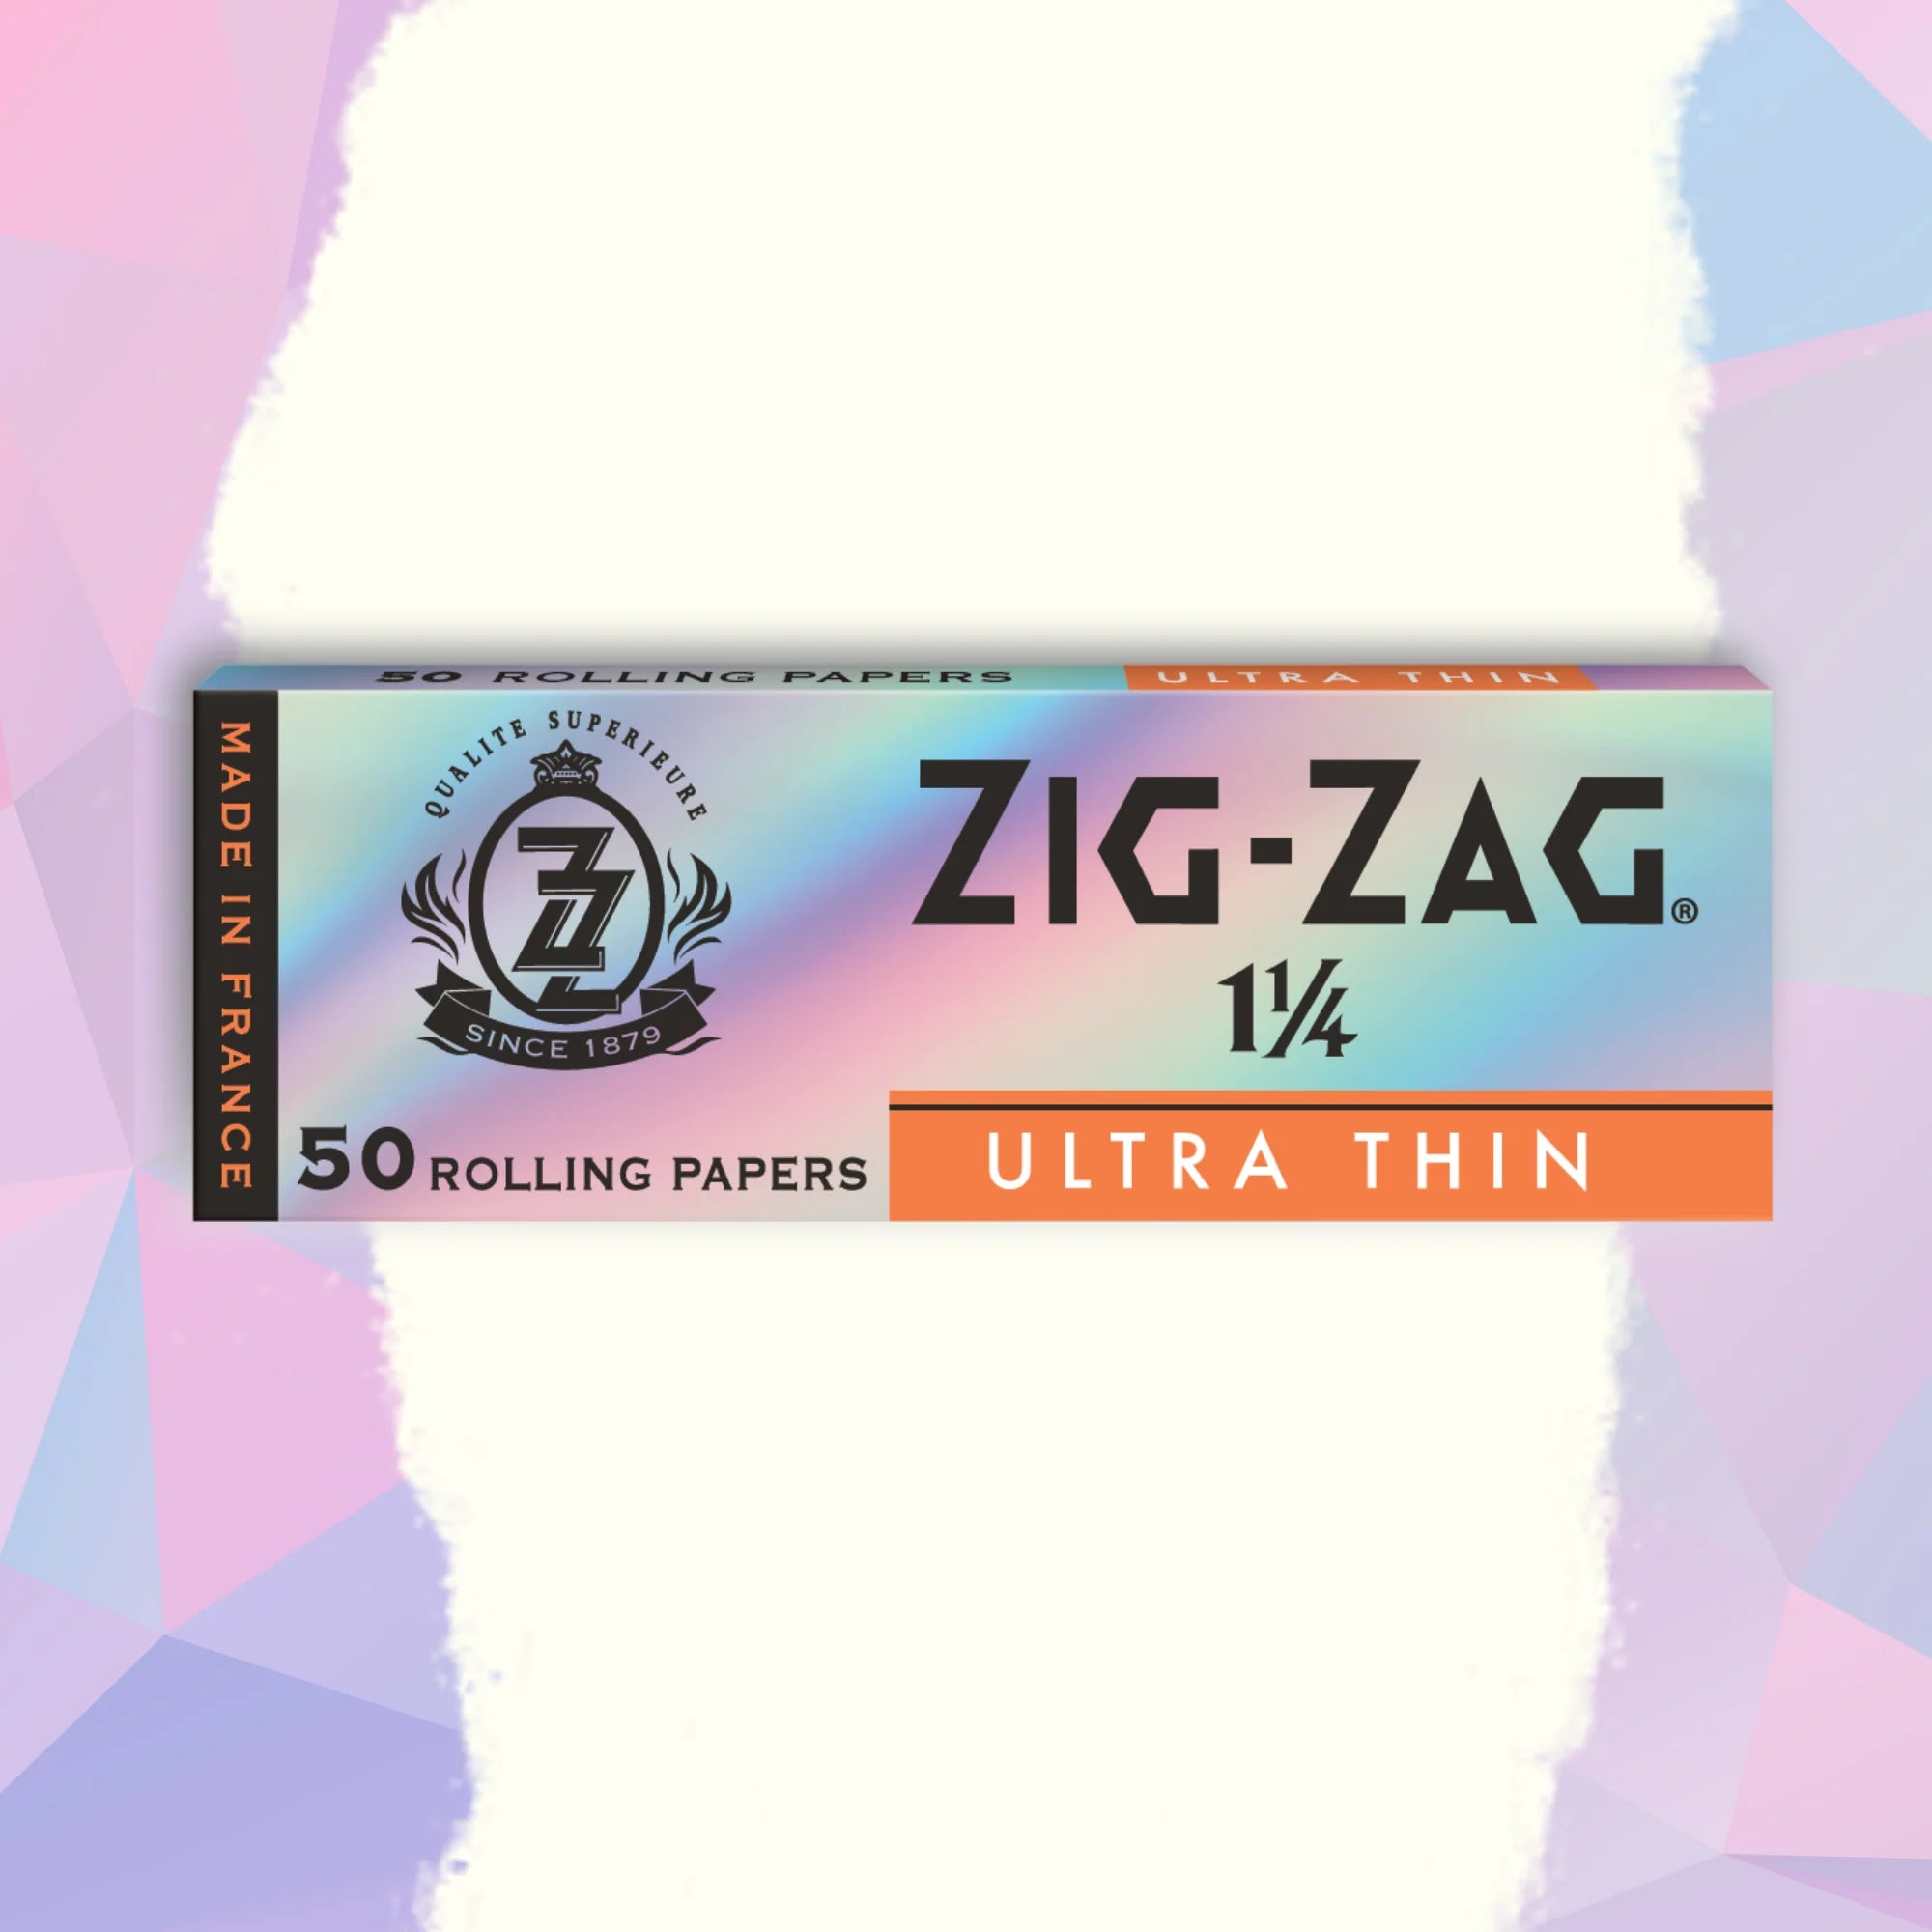 Zig-Zag 1 1/4 Ultra Thin Papers